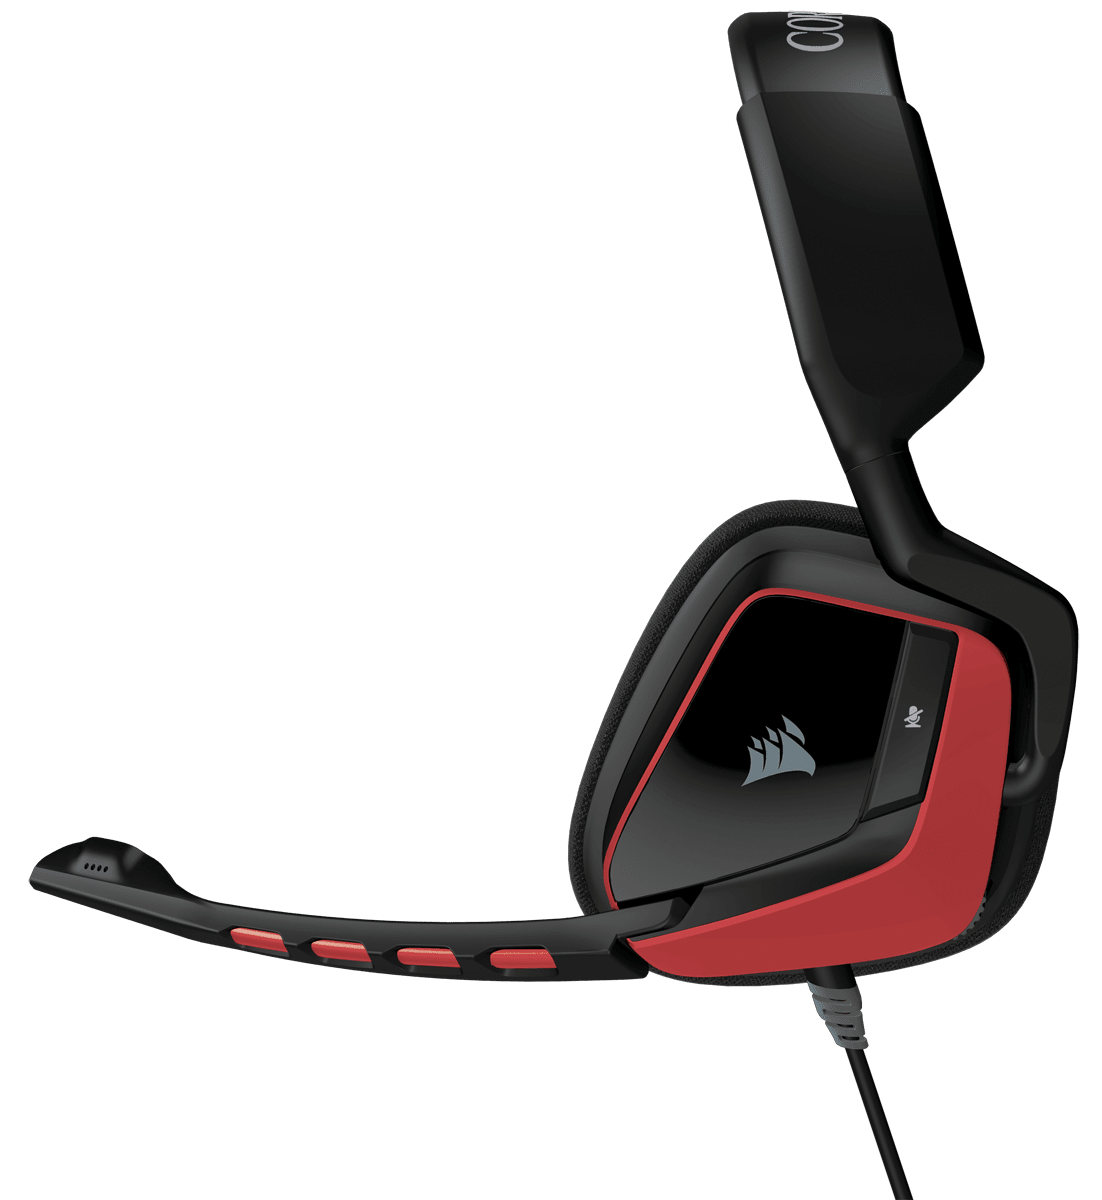 VOID Surround Hybrid Stereo Headset with Dolby 7.1 USB Adapter